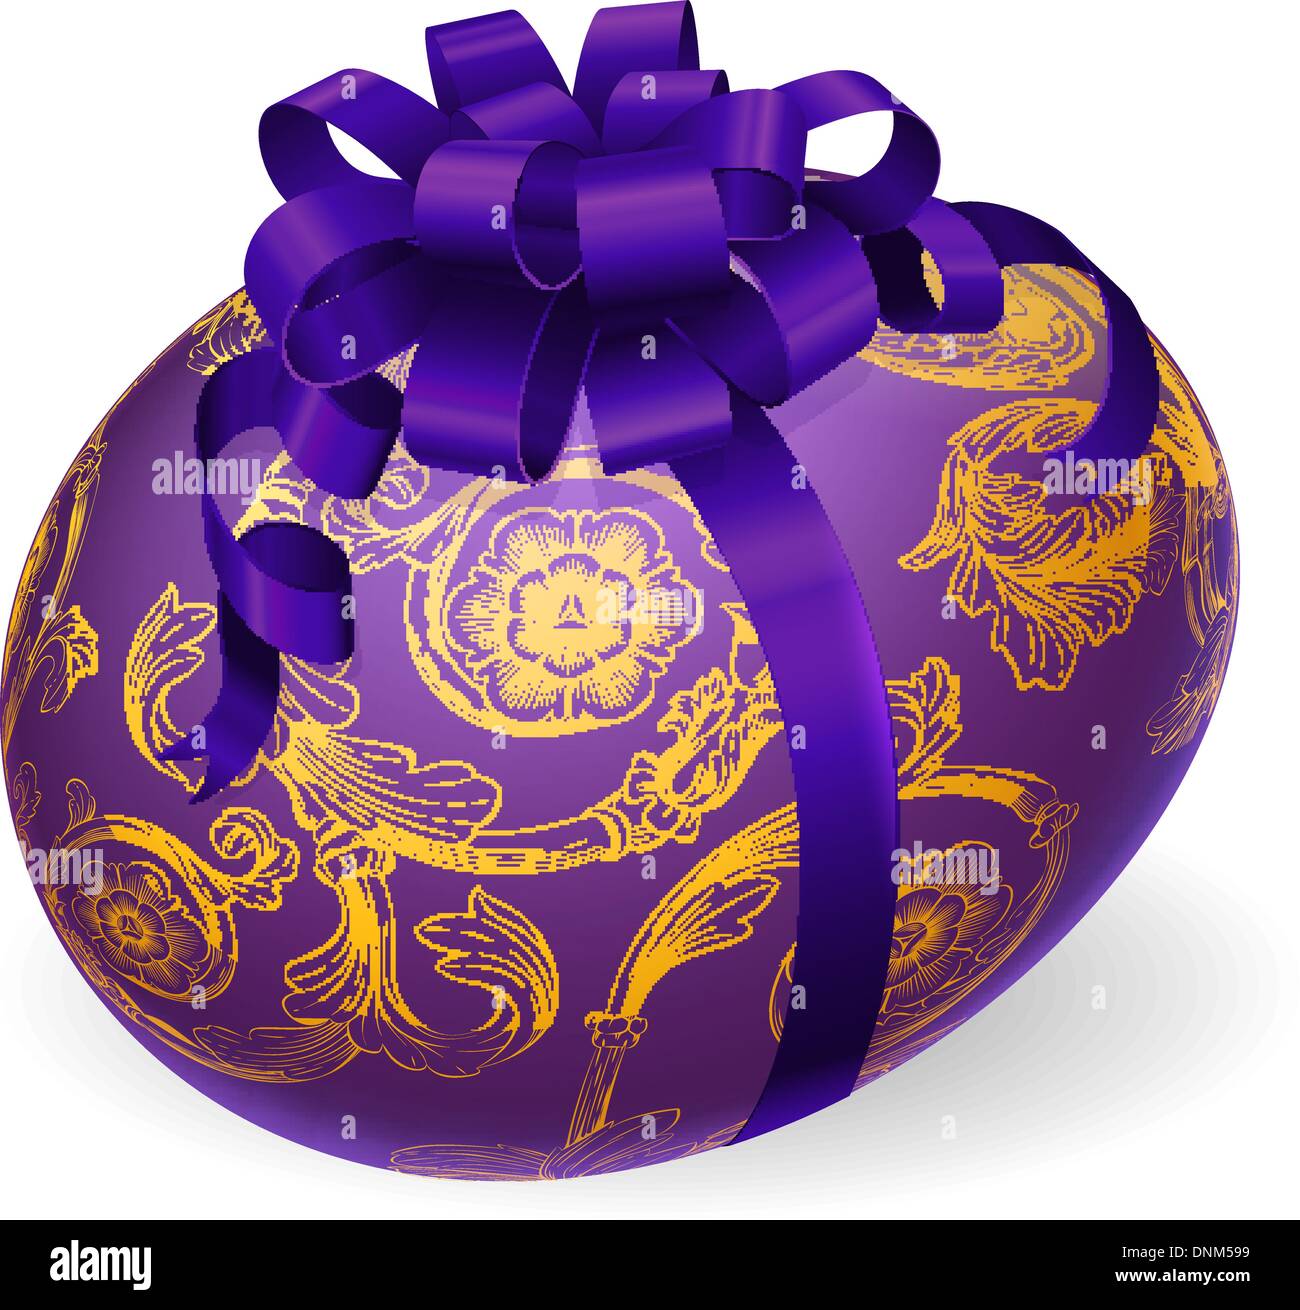 Illustration of a luxury patterned Easter egg wrapped with satin bow Stock Vector